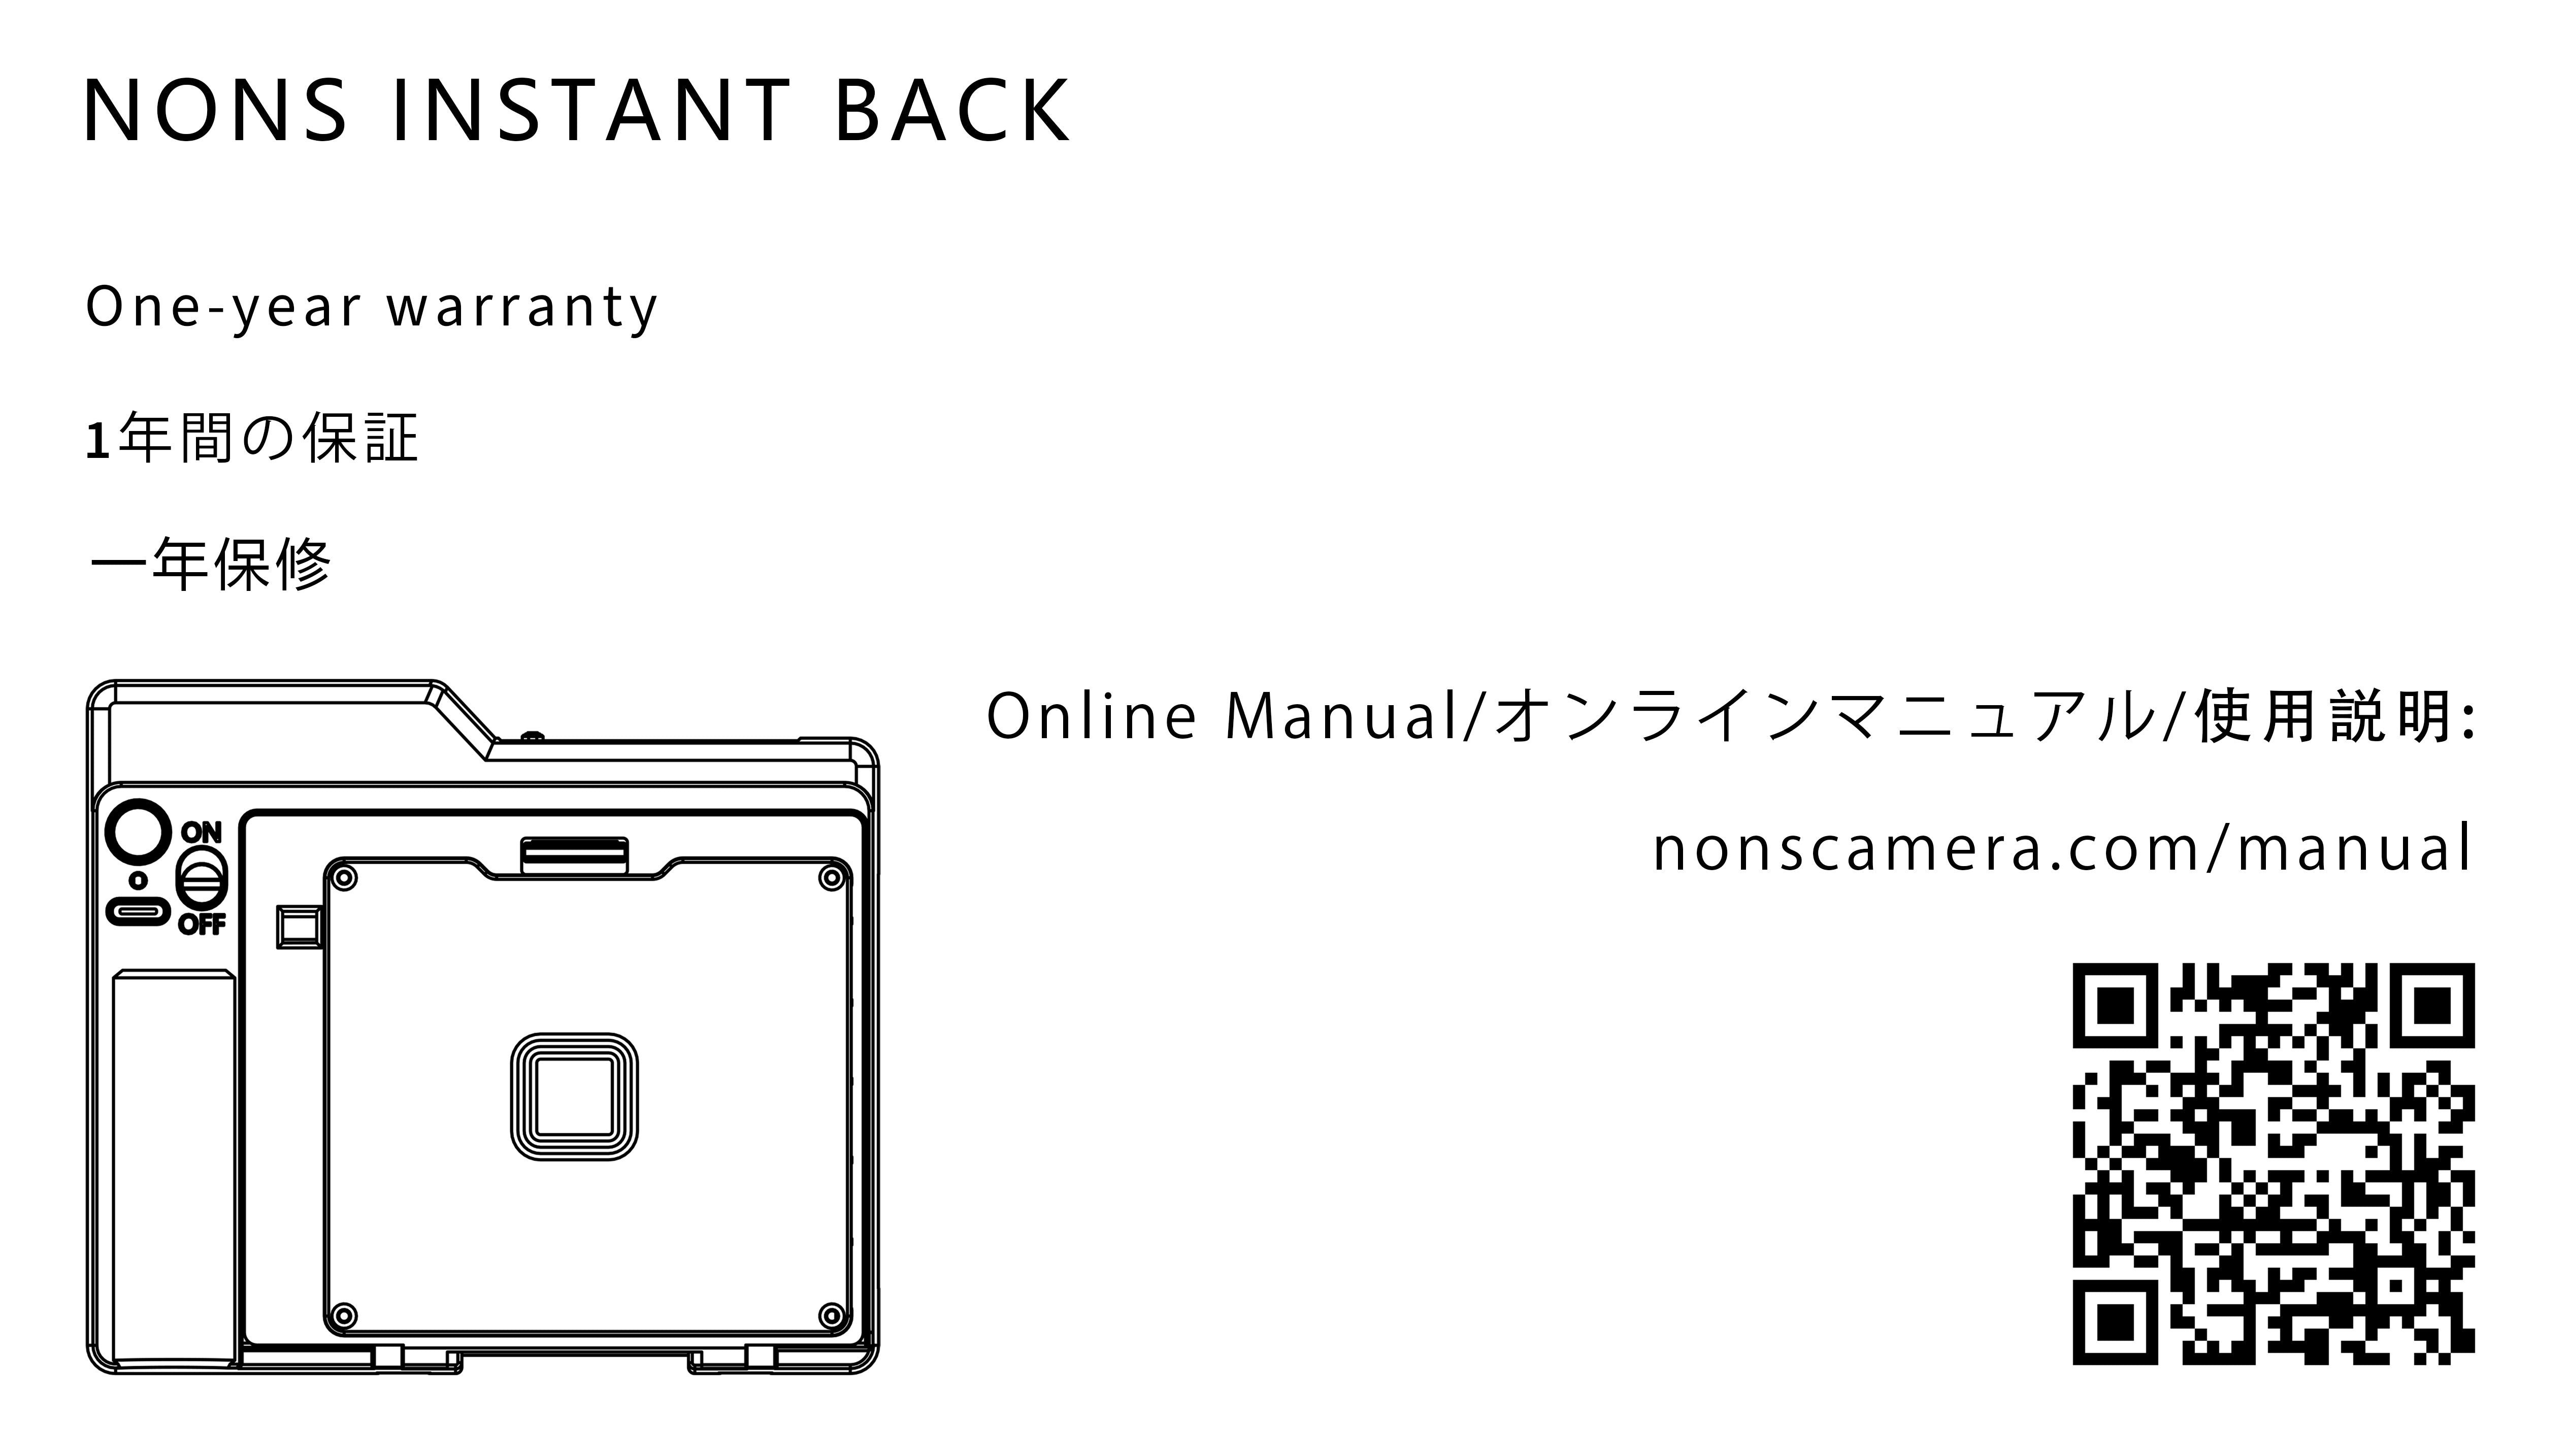 NONS Instant Back Manual – NONS CAMERA